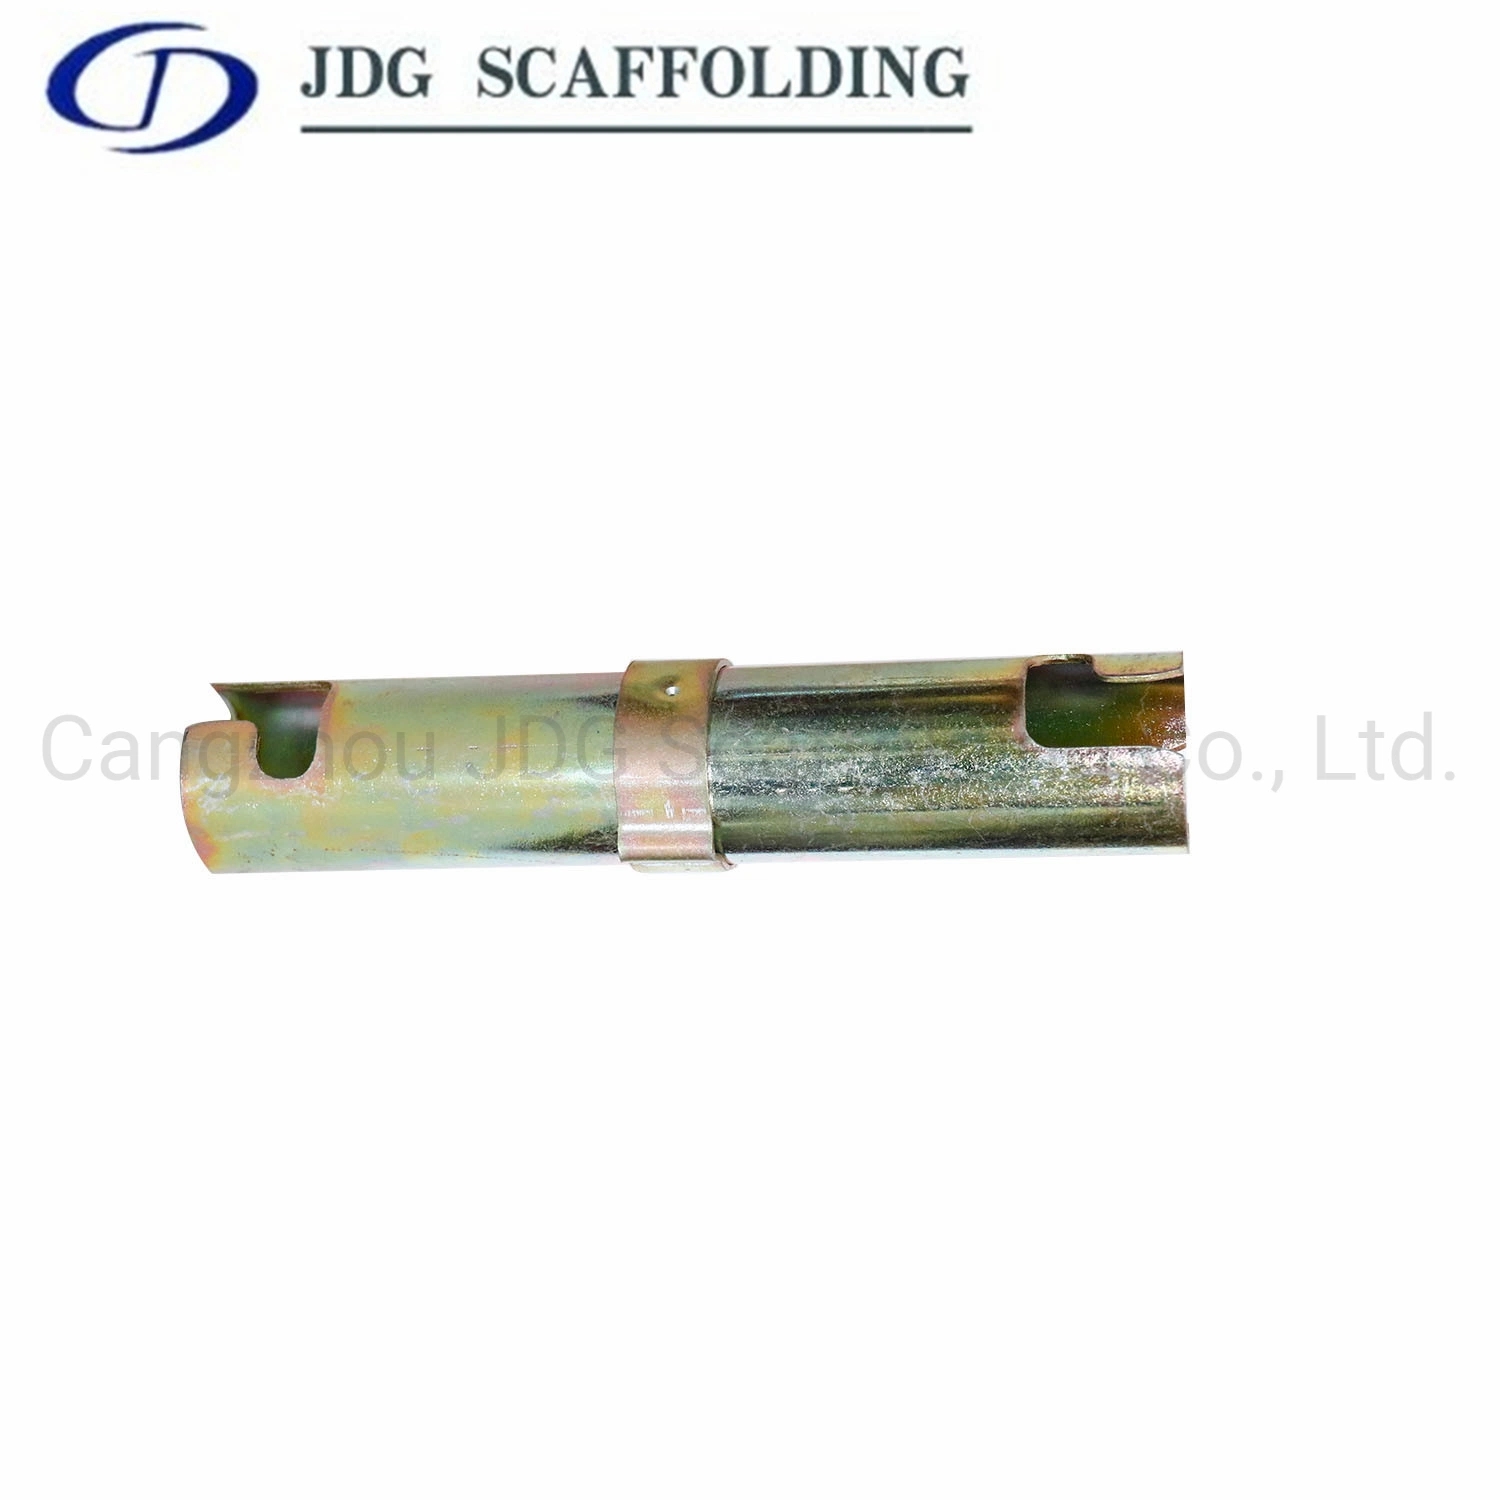 Korean Scaffolding Accessories Pressed Joint Pin for Construction